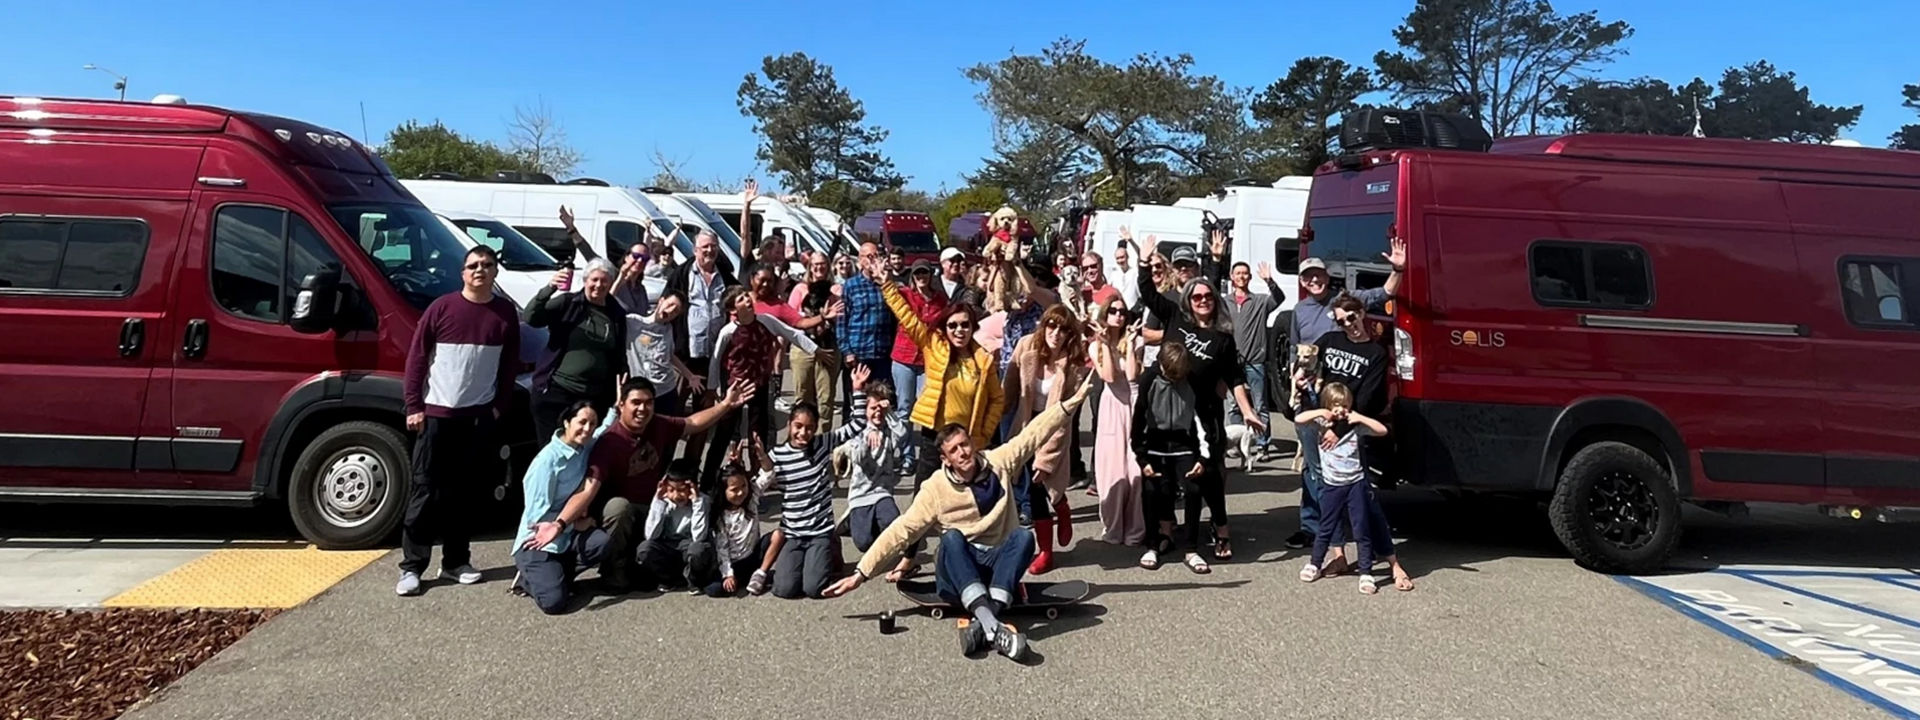 group photo of adults and children in front of RVs